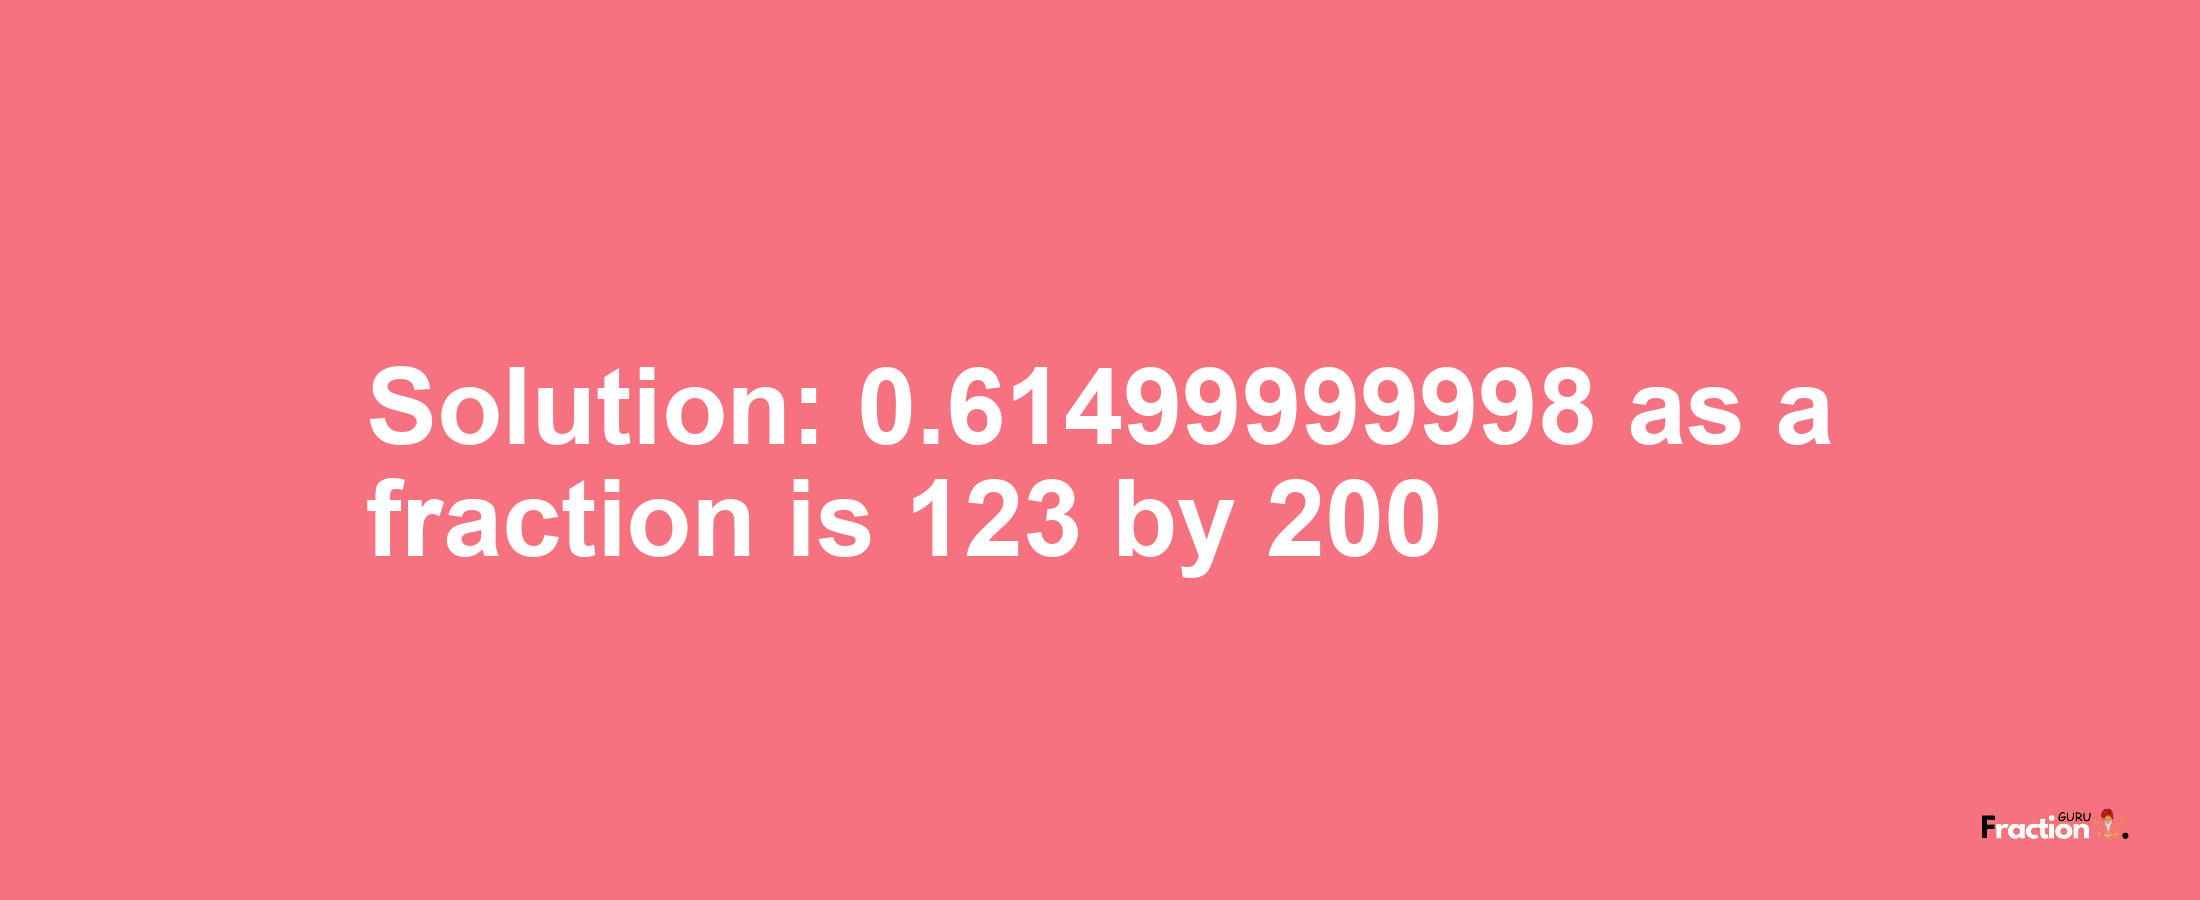 Solution:0.61499999998 as a fraction is 123/200